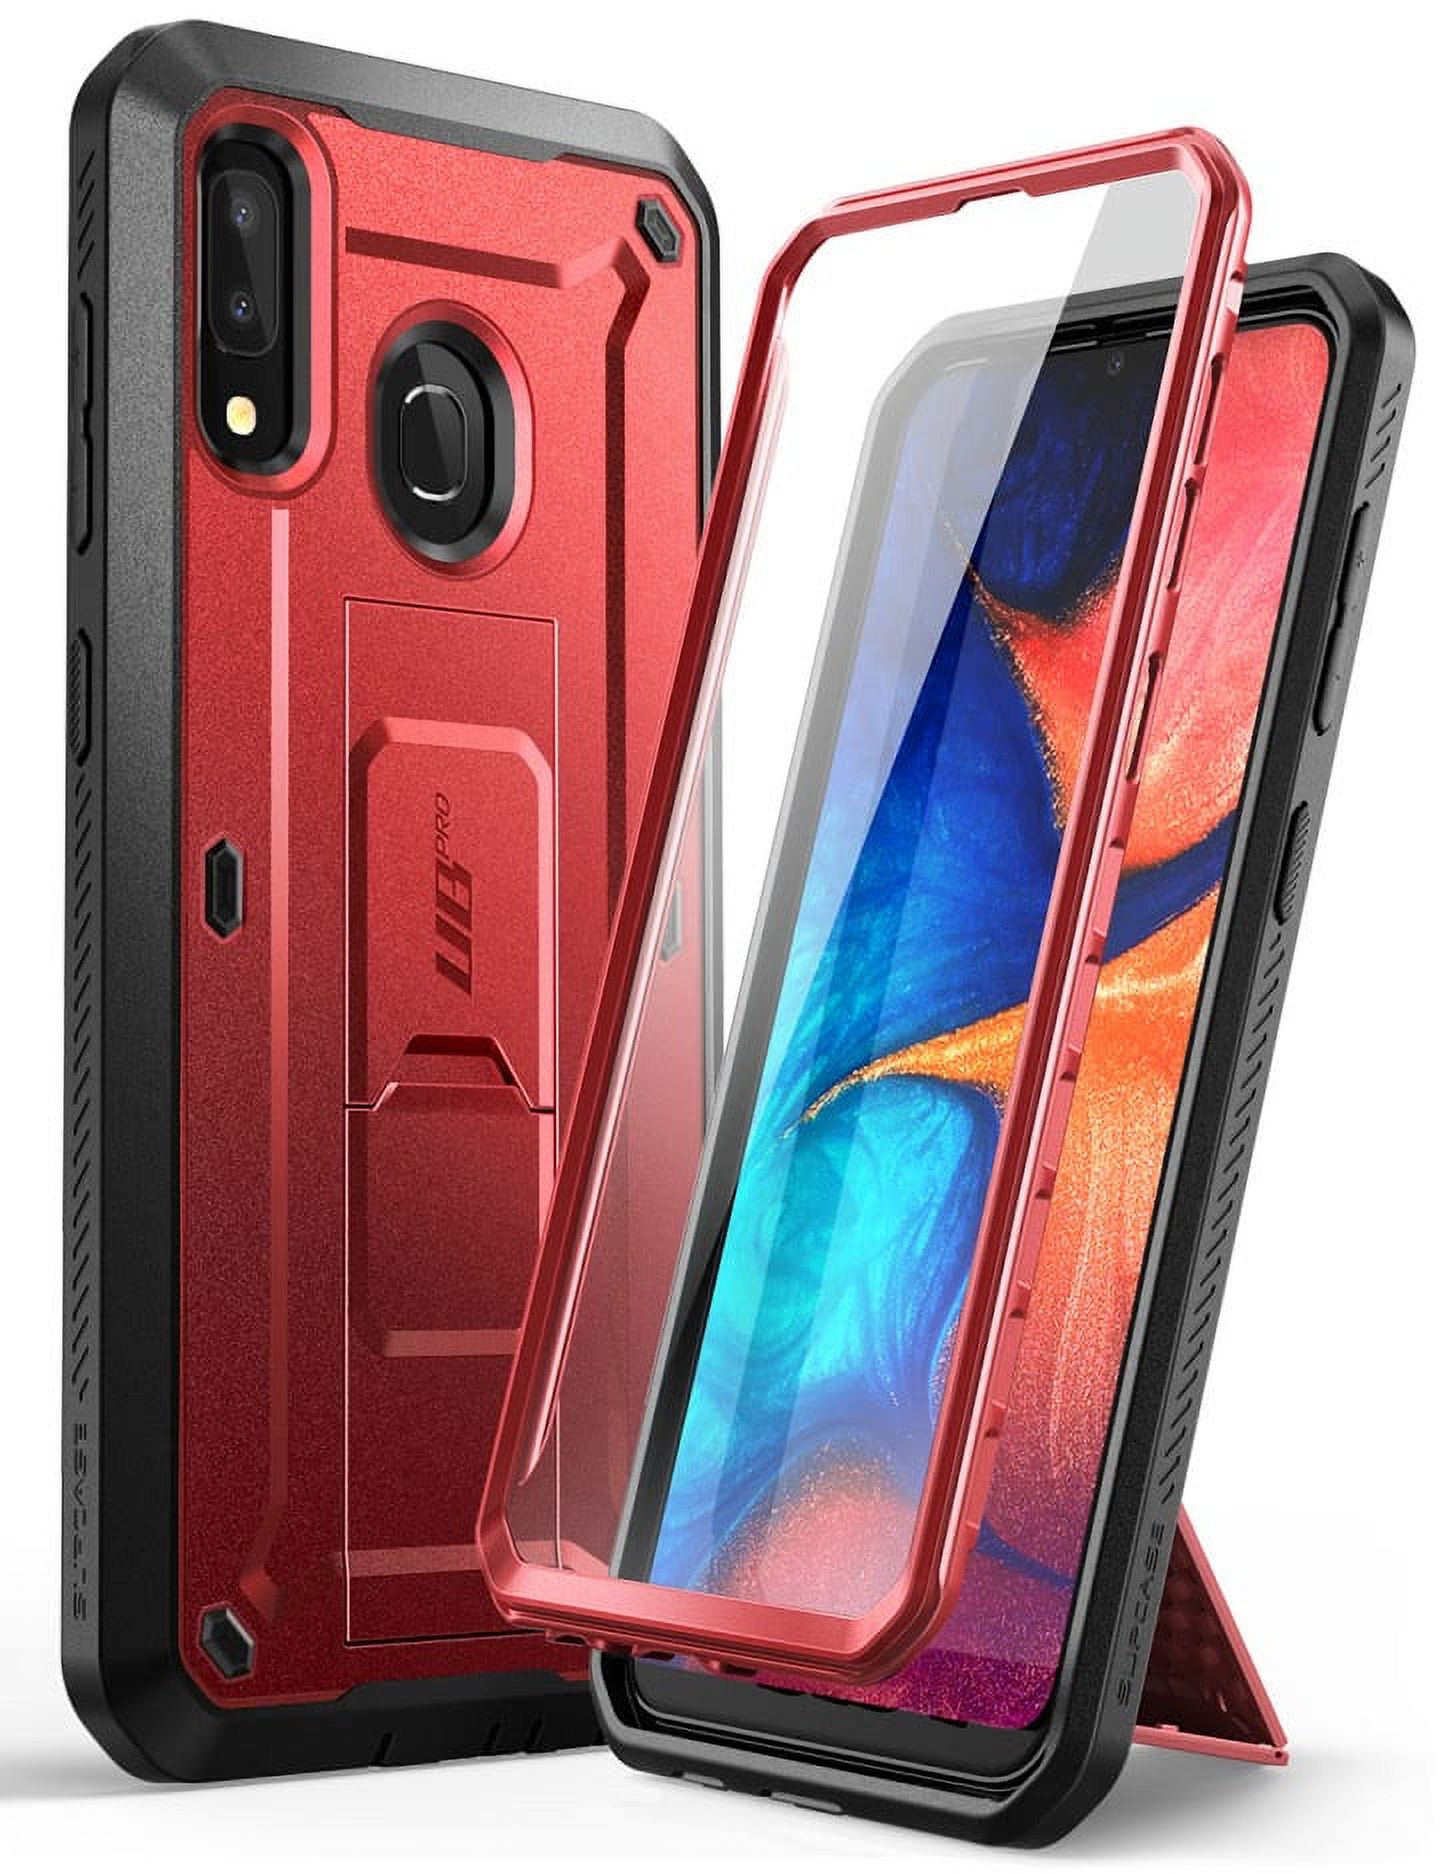 SUPCASE Unicorn Beetle Pro Series Designed for Samsung Galaxy A20 /A30 Case, Full-Body Rugged Holster Case with Built-in Screen Protector (MetallicRed) - image 1 of 9